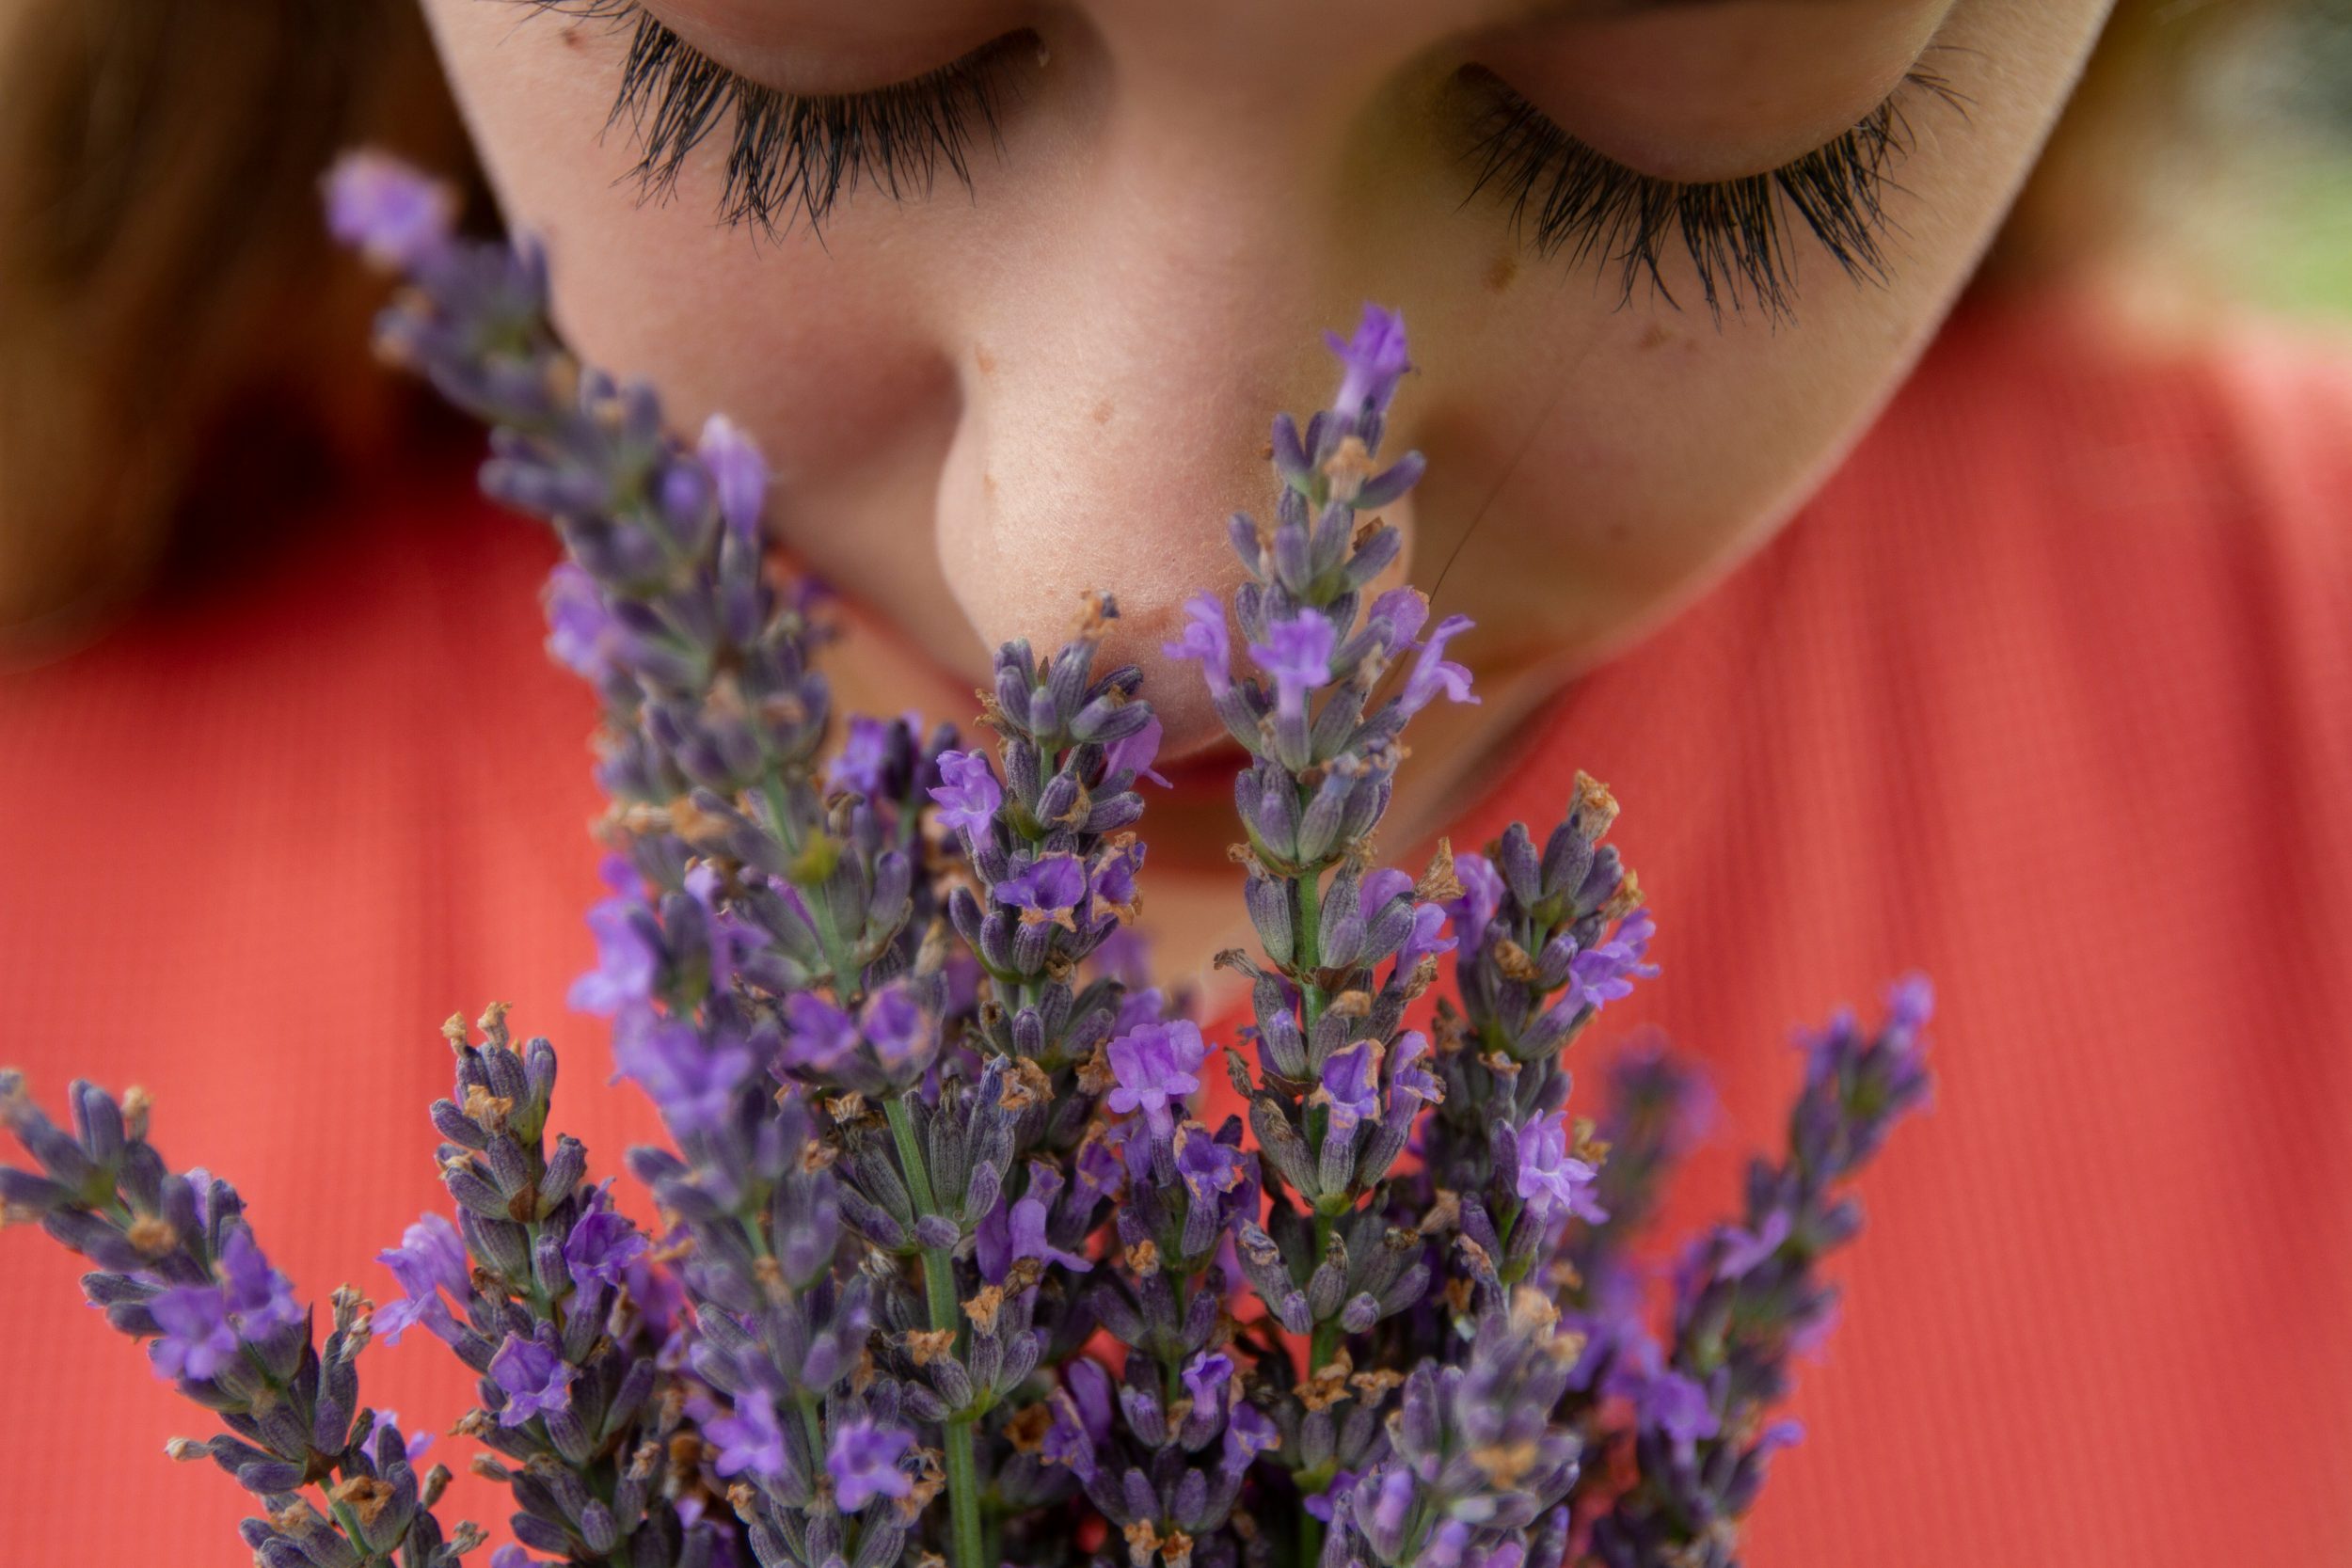 The Psychology of Smell